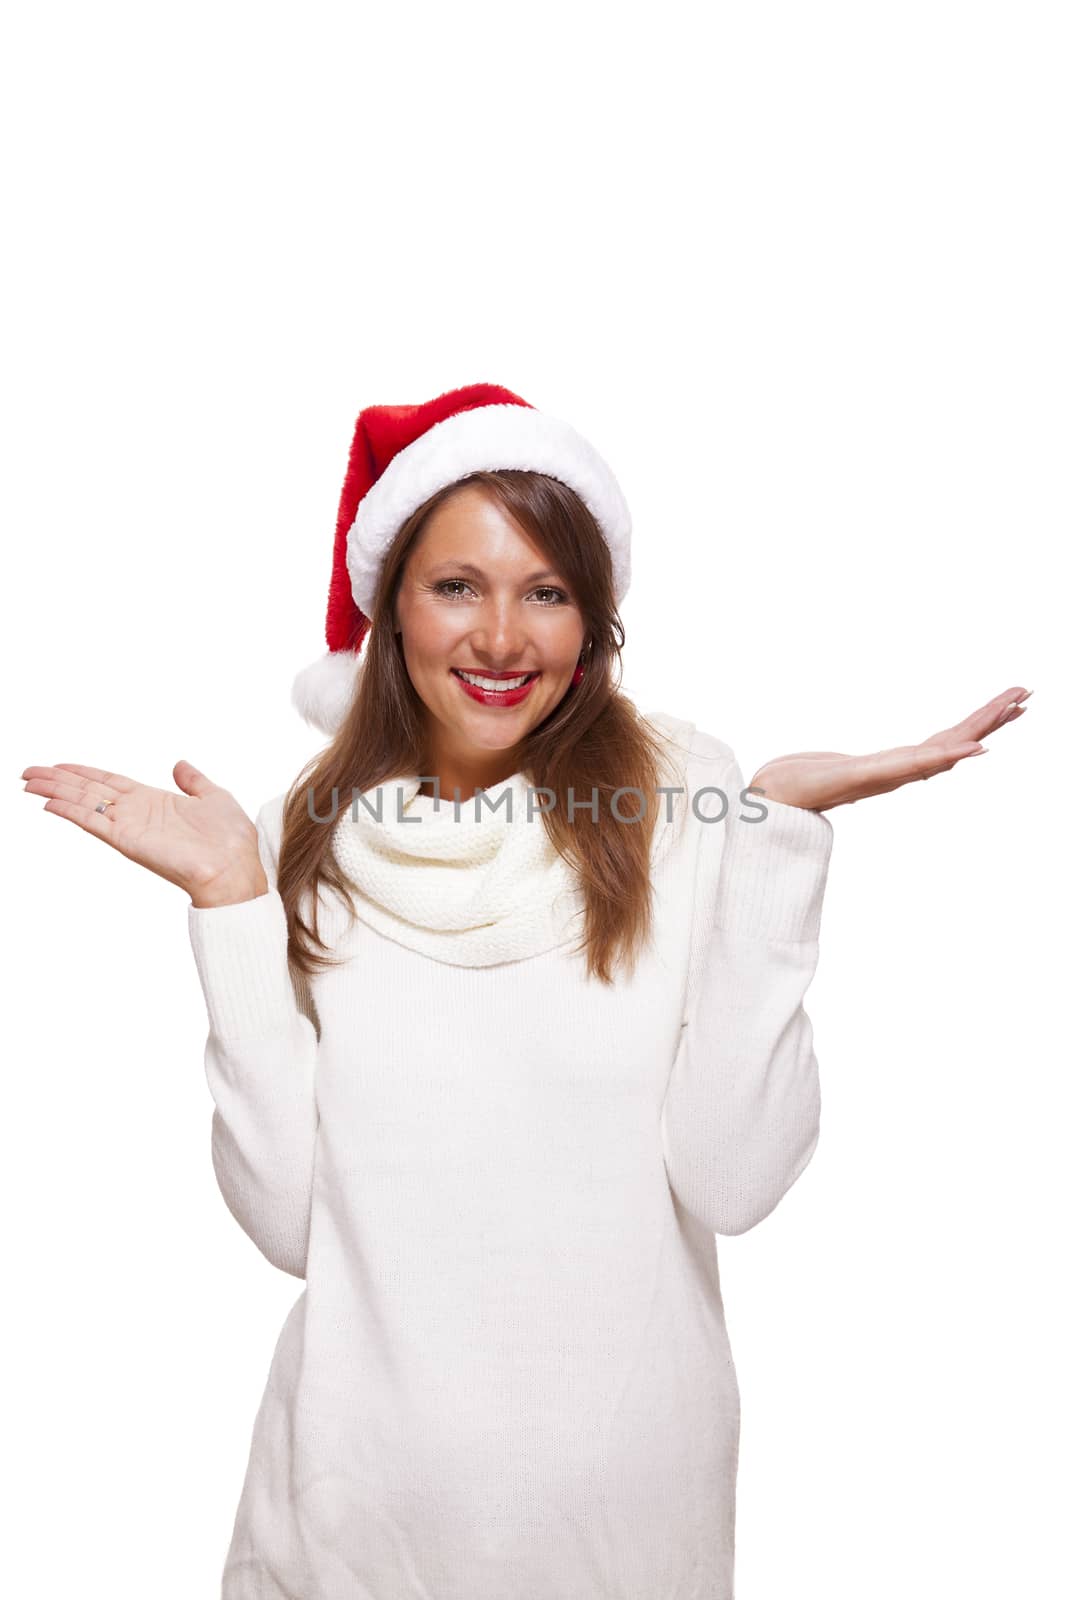 Attractive woman wearing a festive red Santa hat snuggling into her warm winter polo-neck sweater with a charming friendly smile, isolated on white